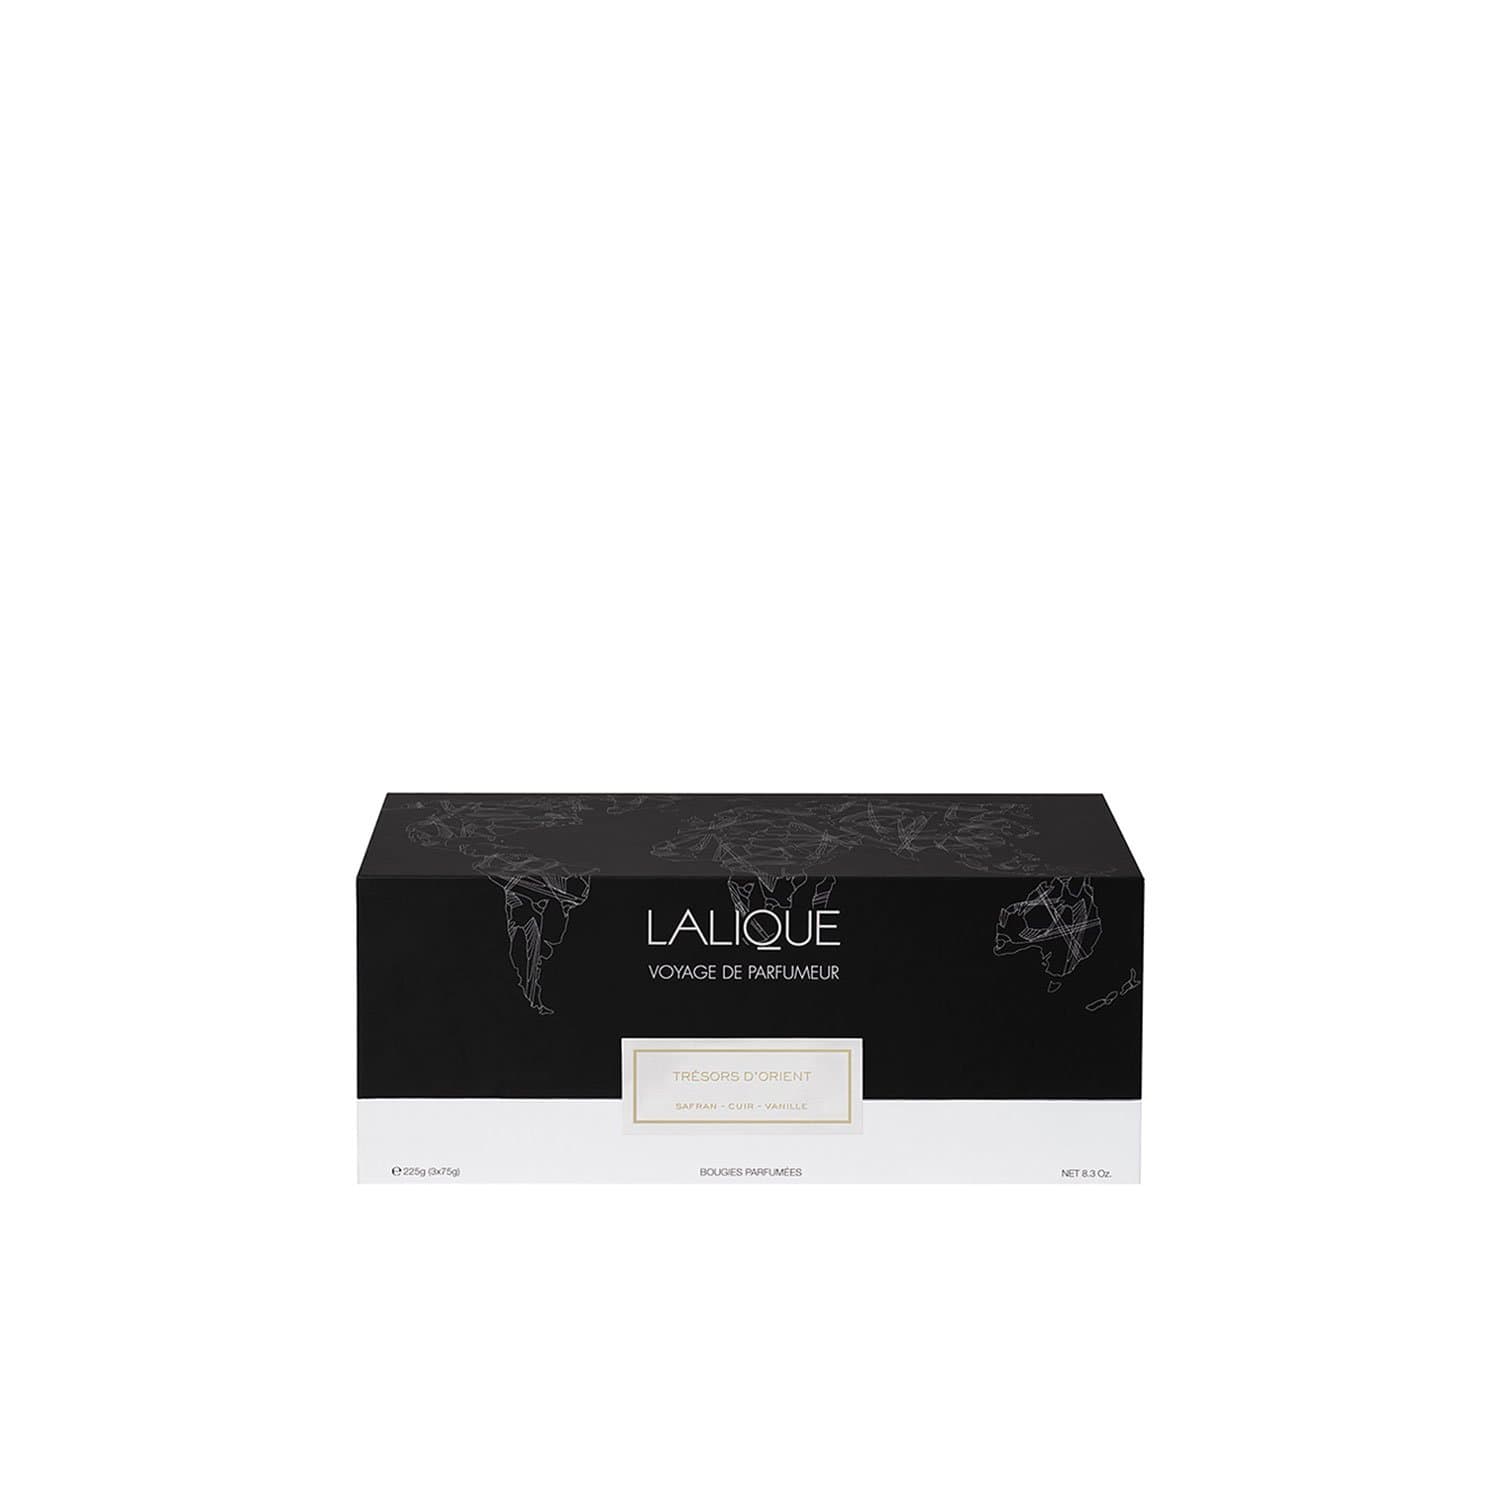 LALIQUE ORIENTAL TREASURES, 3PC SCENTED CANDLES GIFT SET 75G - B20162